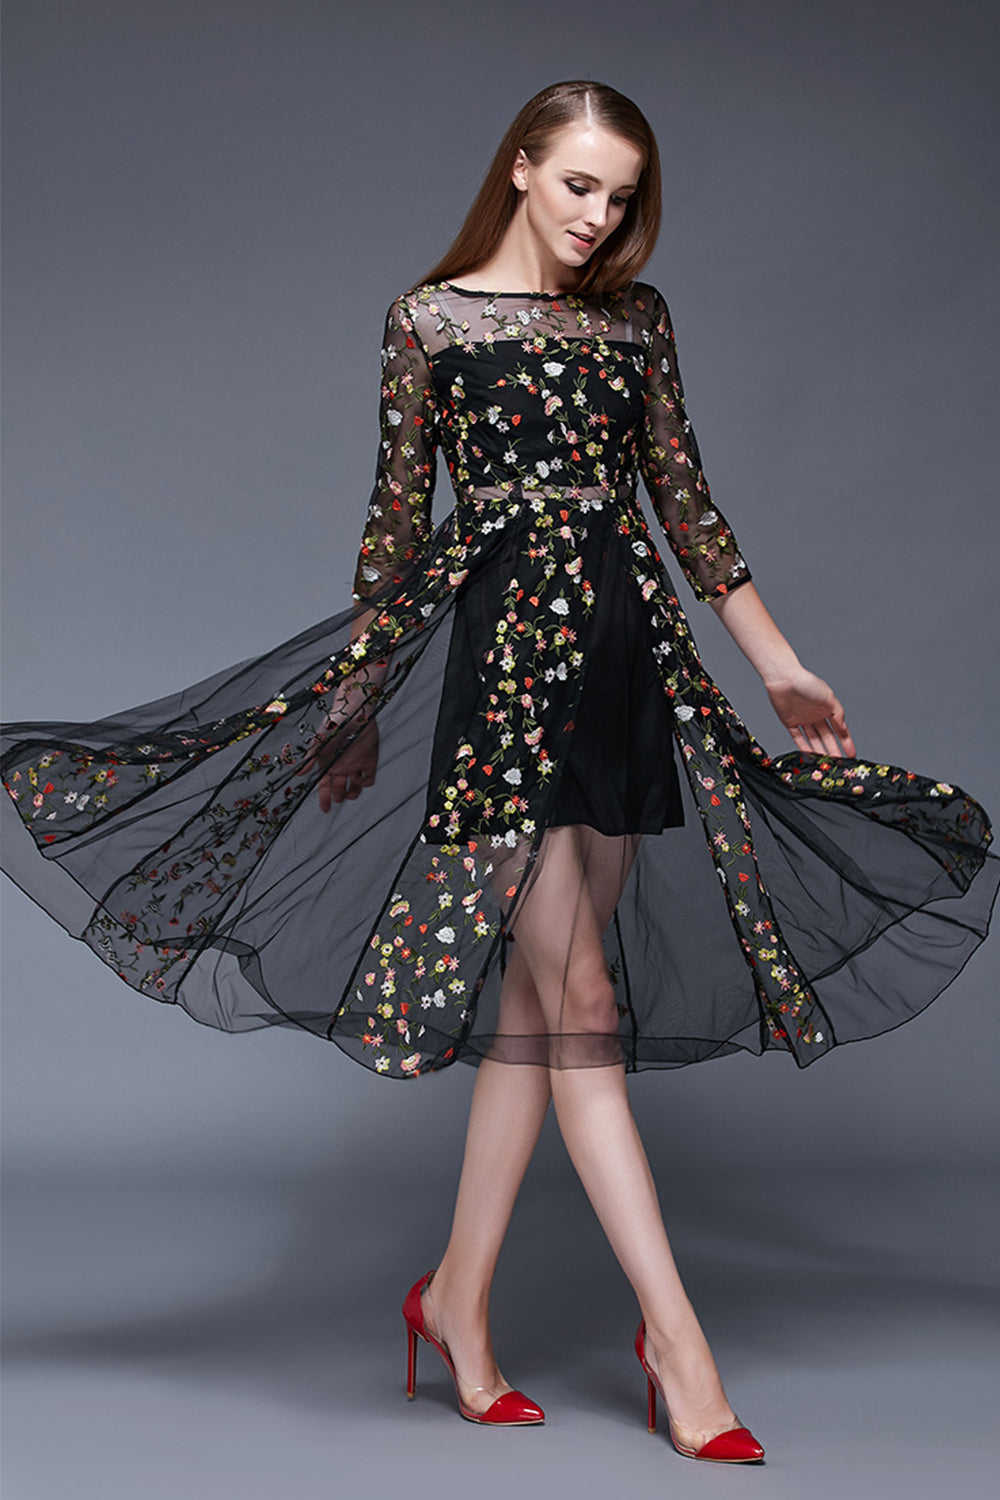 Ketty More Women Floral Embroidery Decorated Sheer Dress-KMWD883